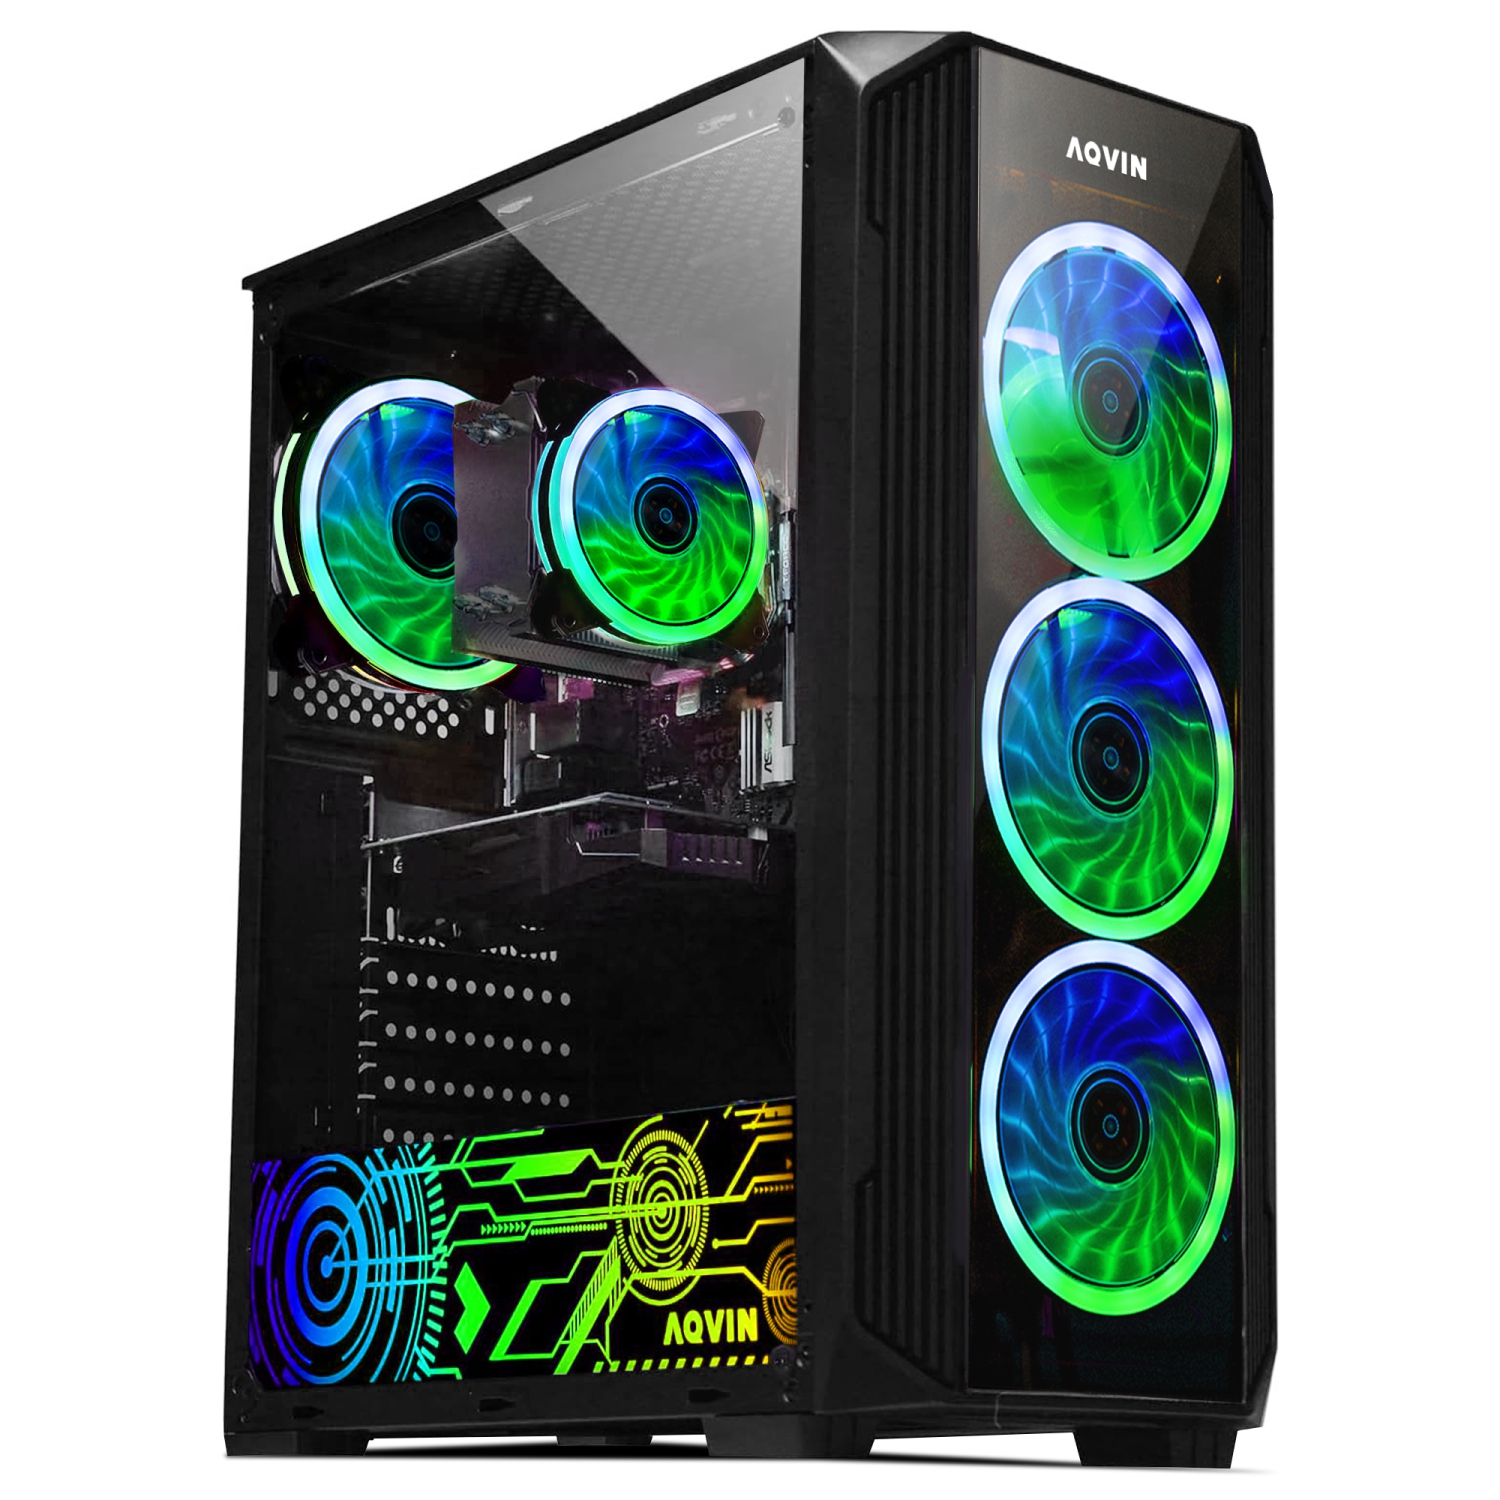 AQVIN ZForce Windows 11 Pro Gaming PC Tower | GeForce RTX 3060 12GB GDDR6 HDMI | Intel i7 Hexa-Core Processor | 32GB DDR4 RAM | 1TB SSD | RGB Keyboard Mouse WIFI - Only at Best Buy